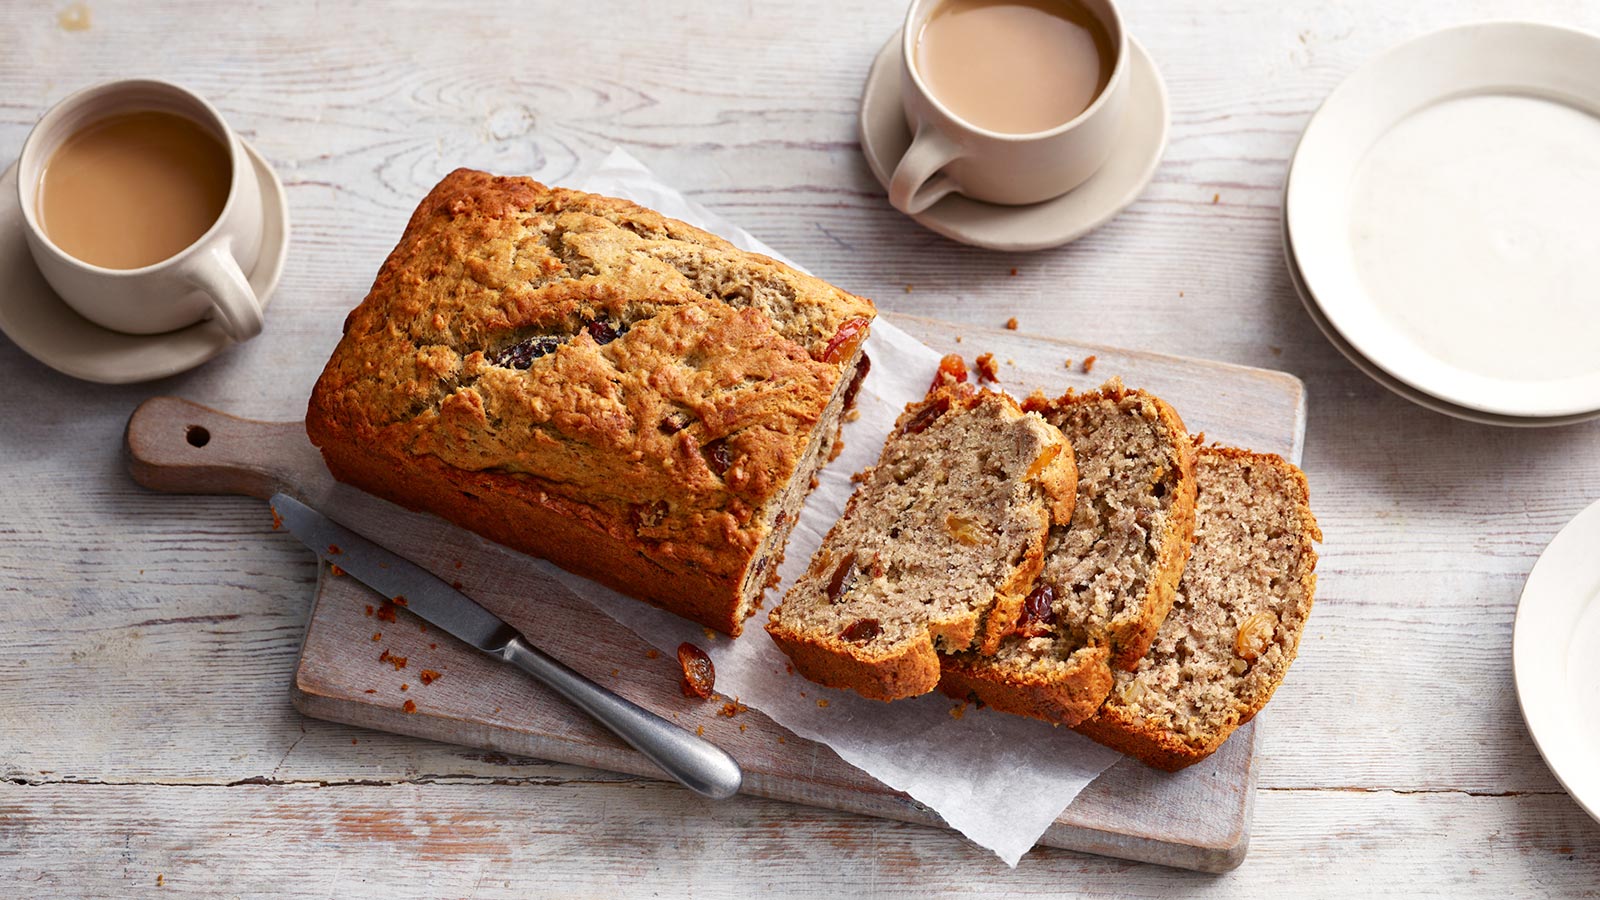 Don’t Freak Out, But We Can Guess Your Location Based on What You Eat Banana Bread